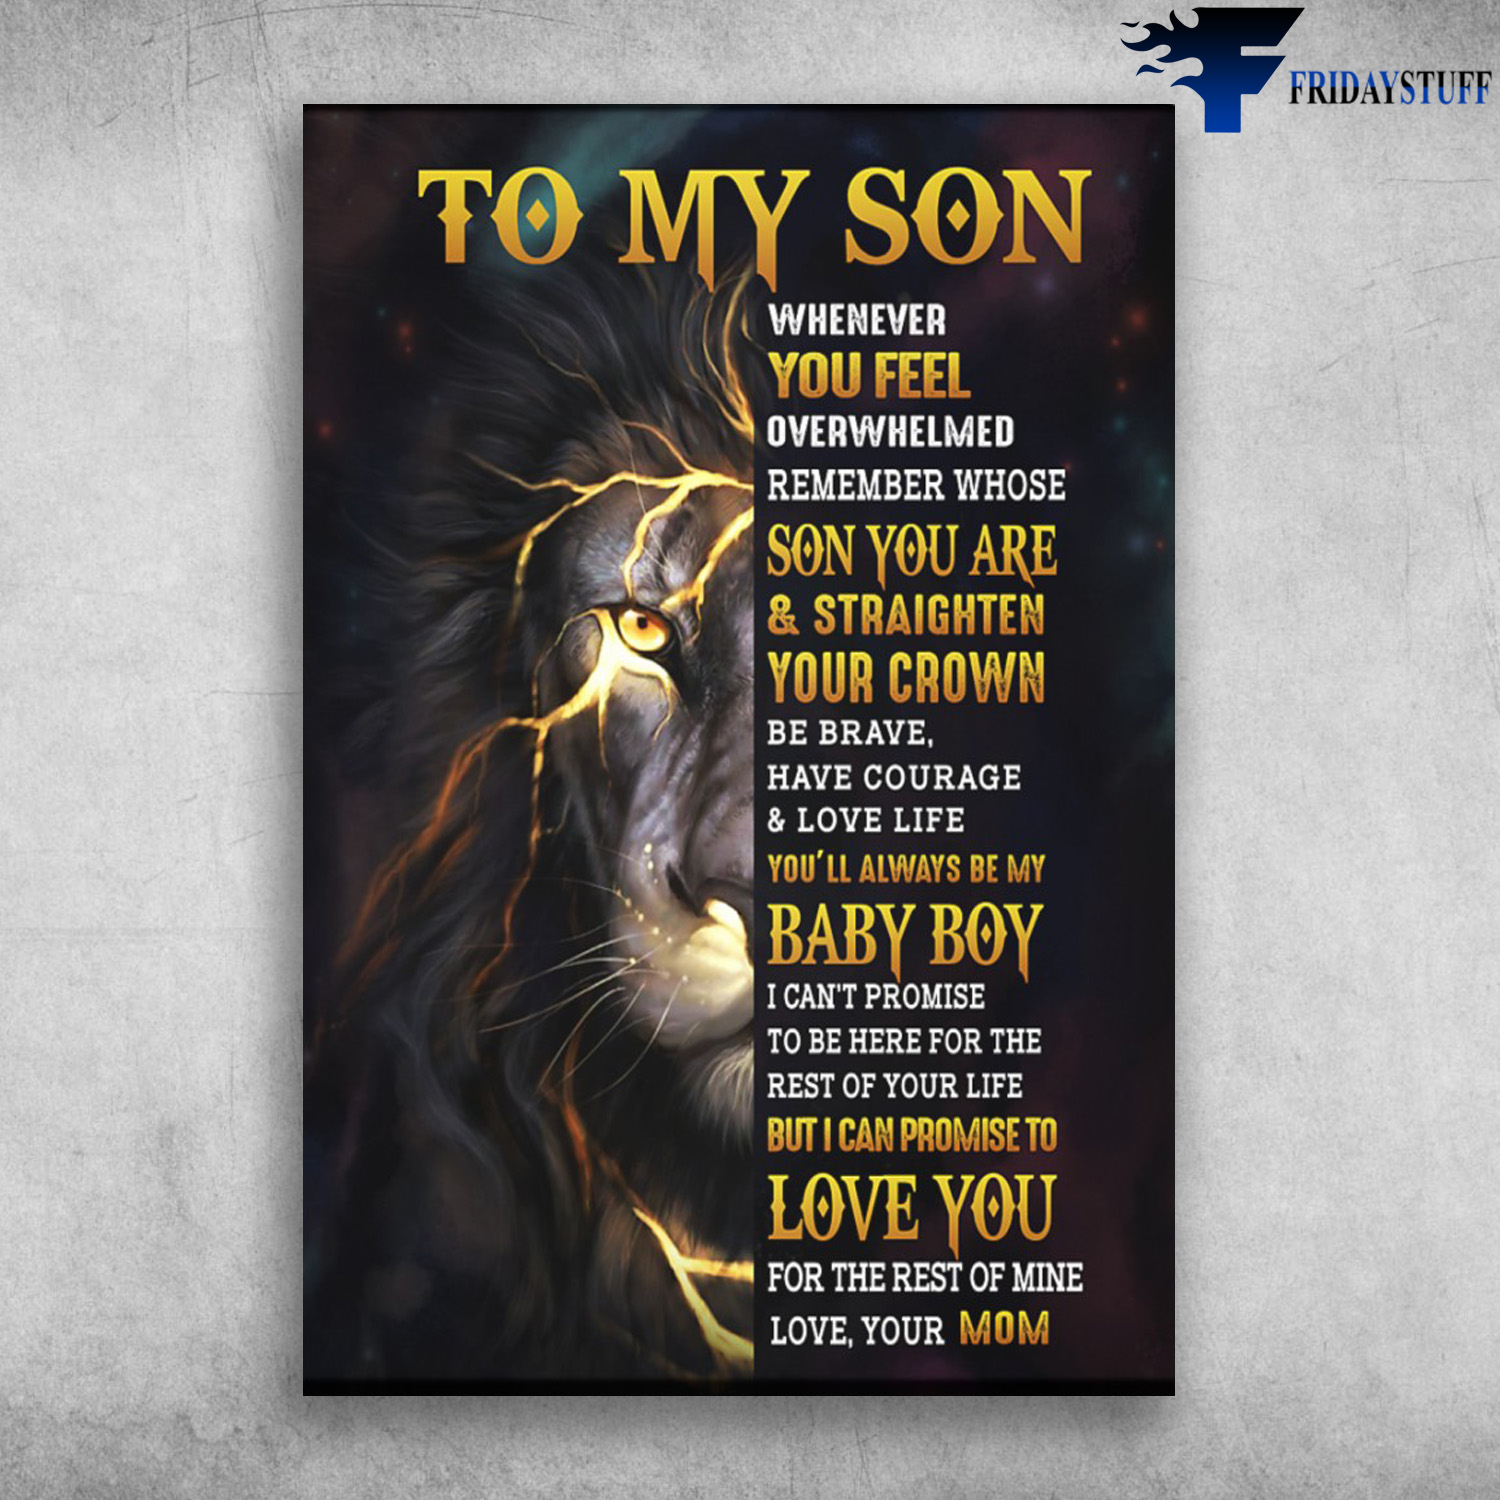 Lion King - To My Son, Whenever You Feel Overwhelmed, Remember Whose Daughter You Are, And Straighten Your Crown, Be Brave Have Courage And Love Life, You'll Always Be My Baby Boy, Love You